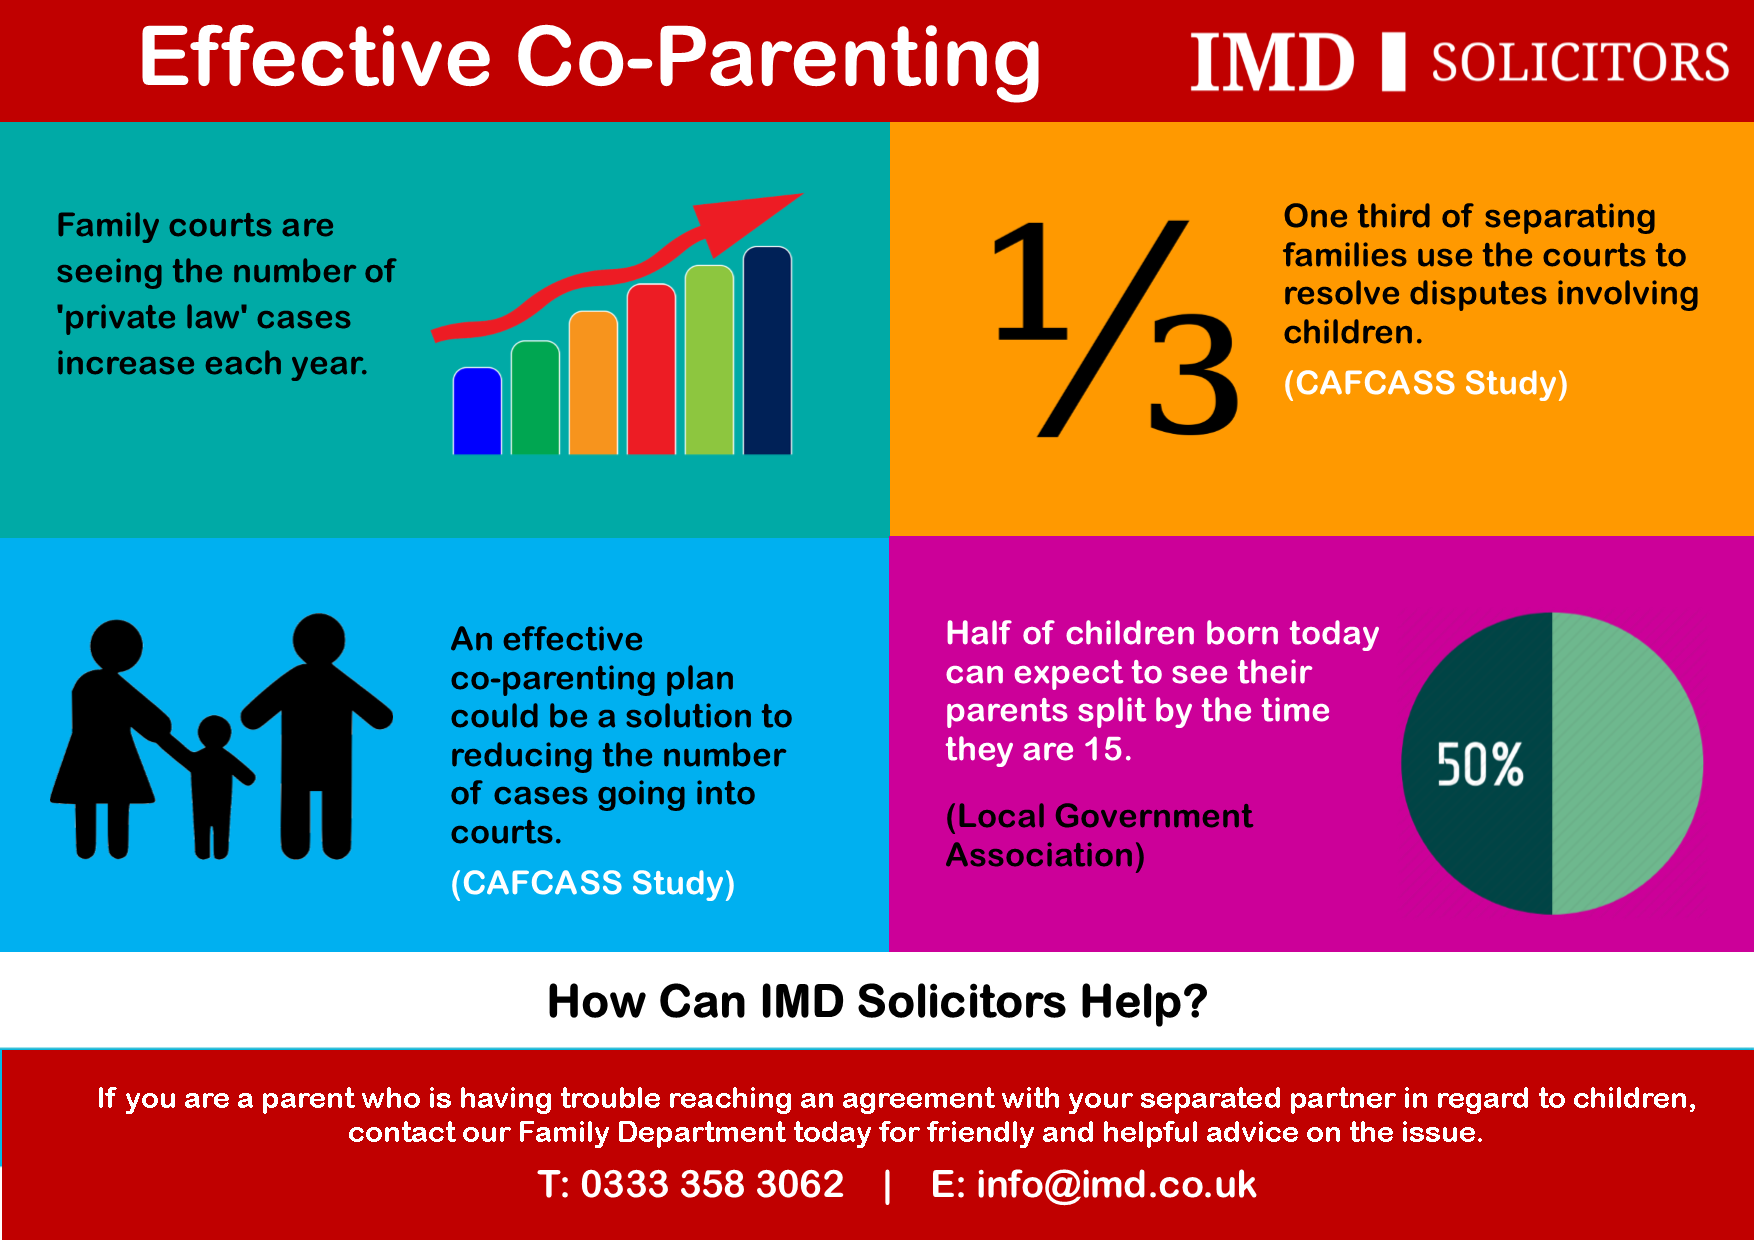 Could effective coparenting be a solution to reducing